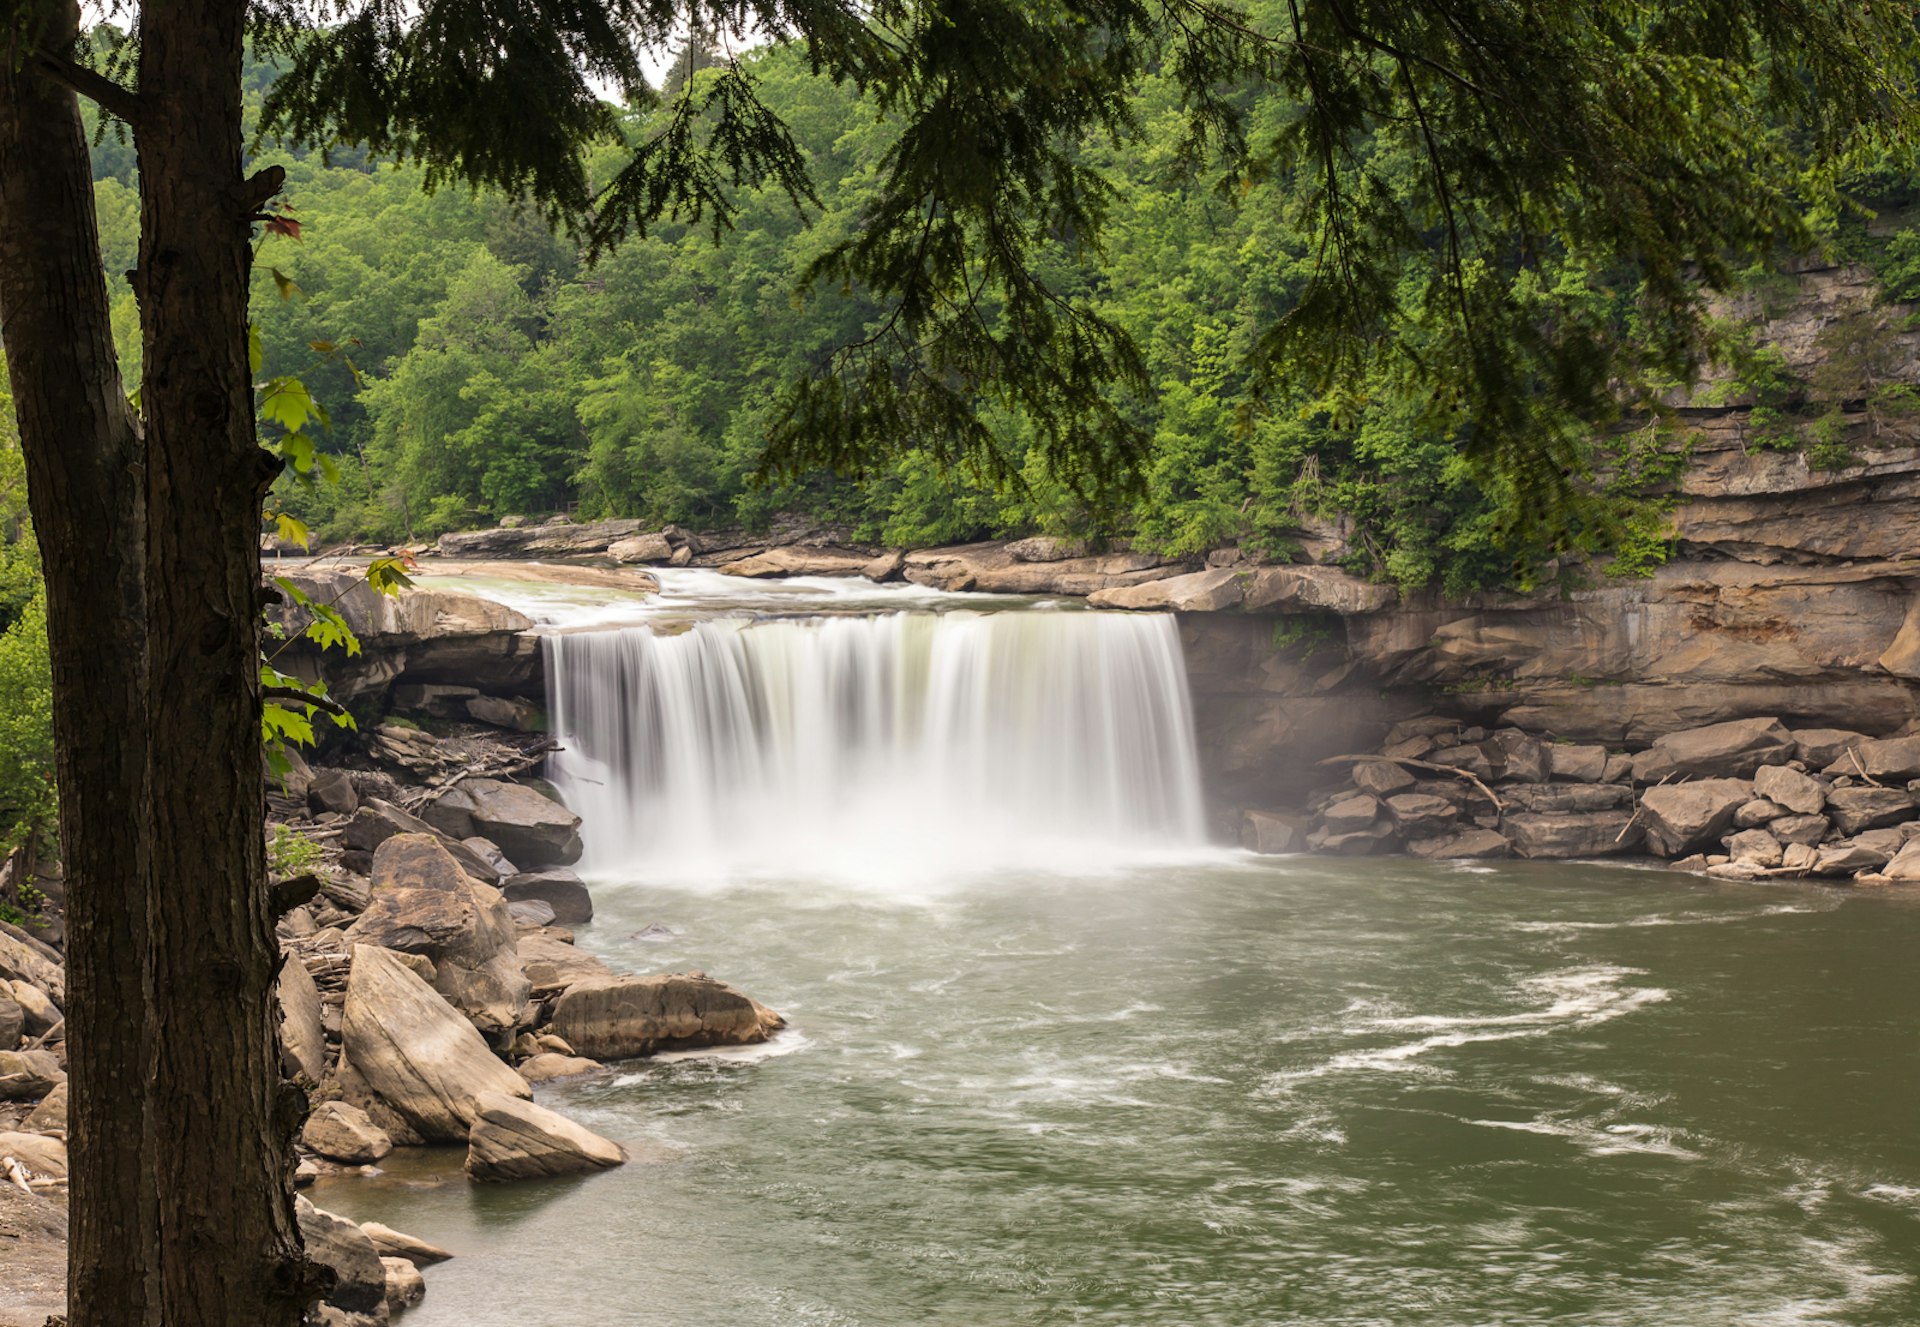 A long exposure of a waterfall, with rocks on either side of the river and green trees in the background; summer trips in the Southern US